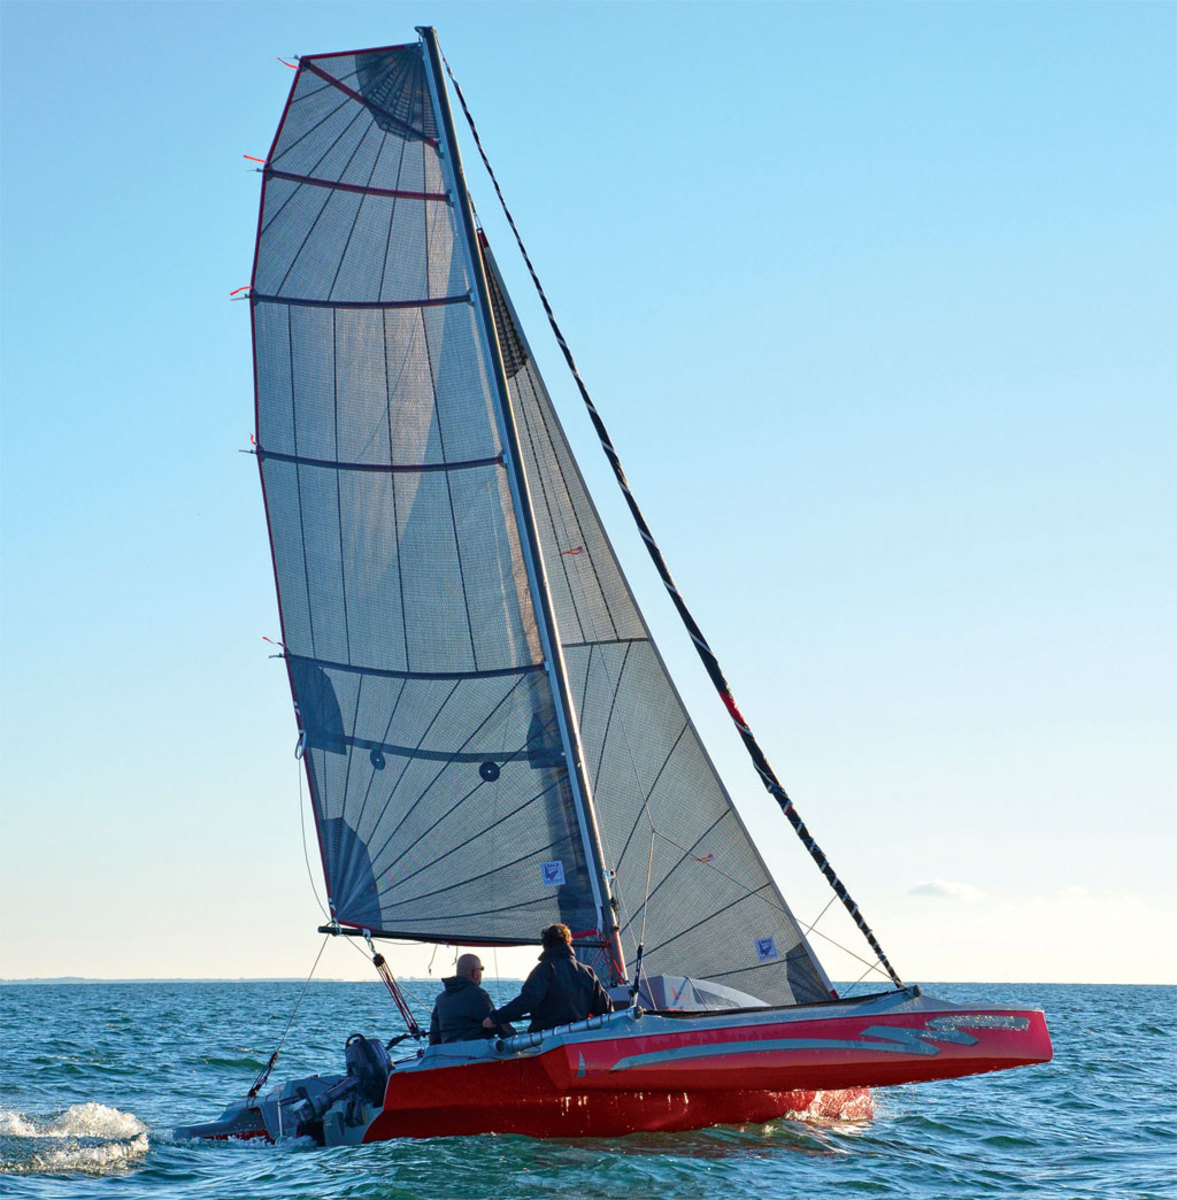 The lack of backstay makes it possible for this tri to carry plenty of roach on its square-top mainsail: note the radial pattern of its laminated panels and full-length battens